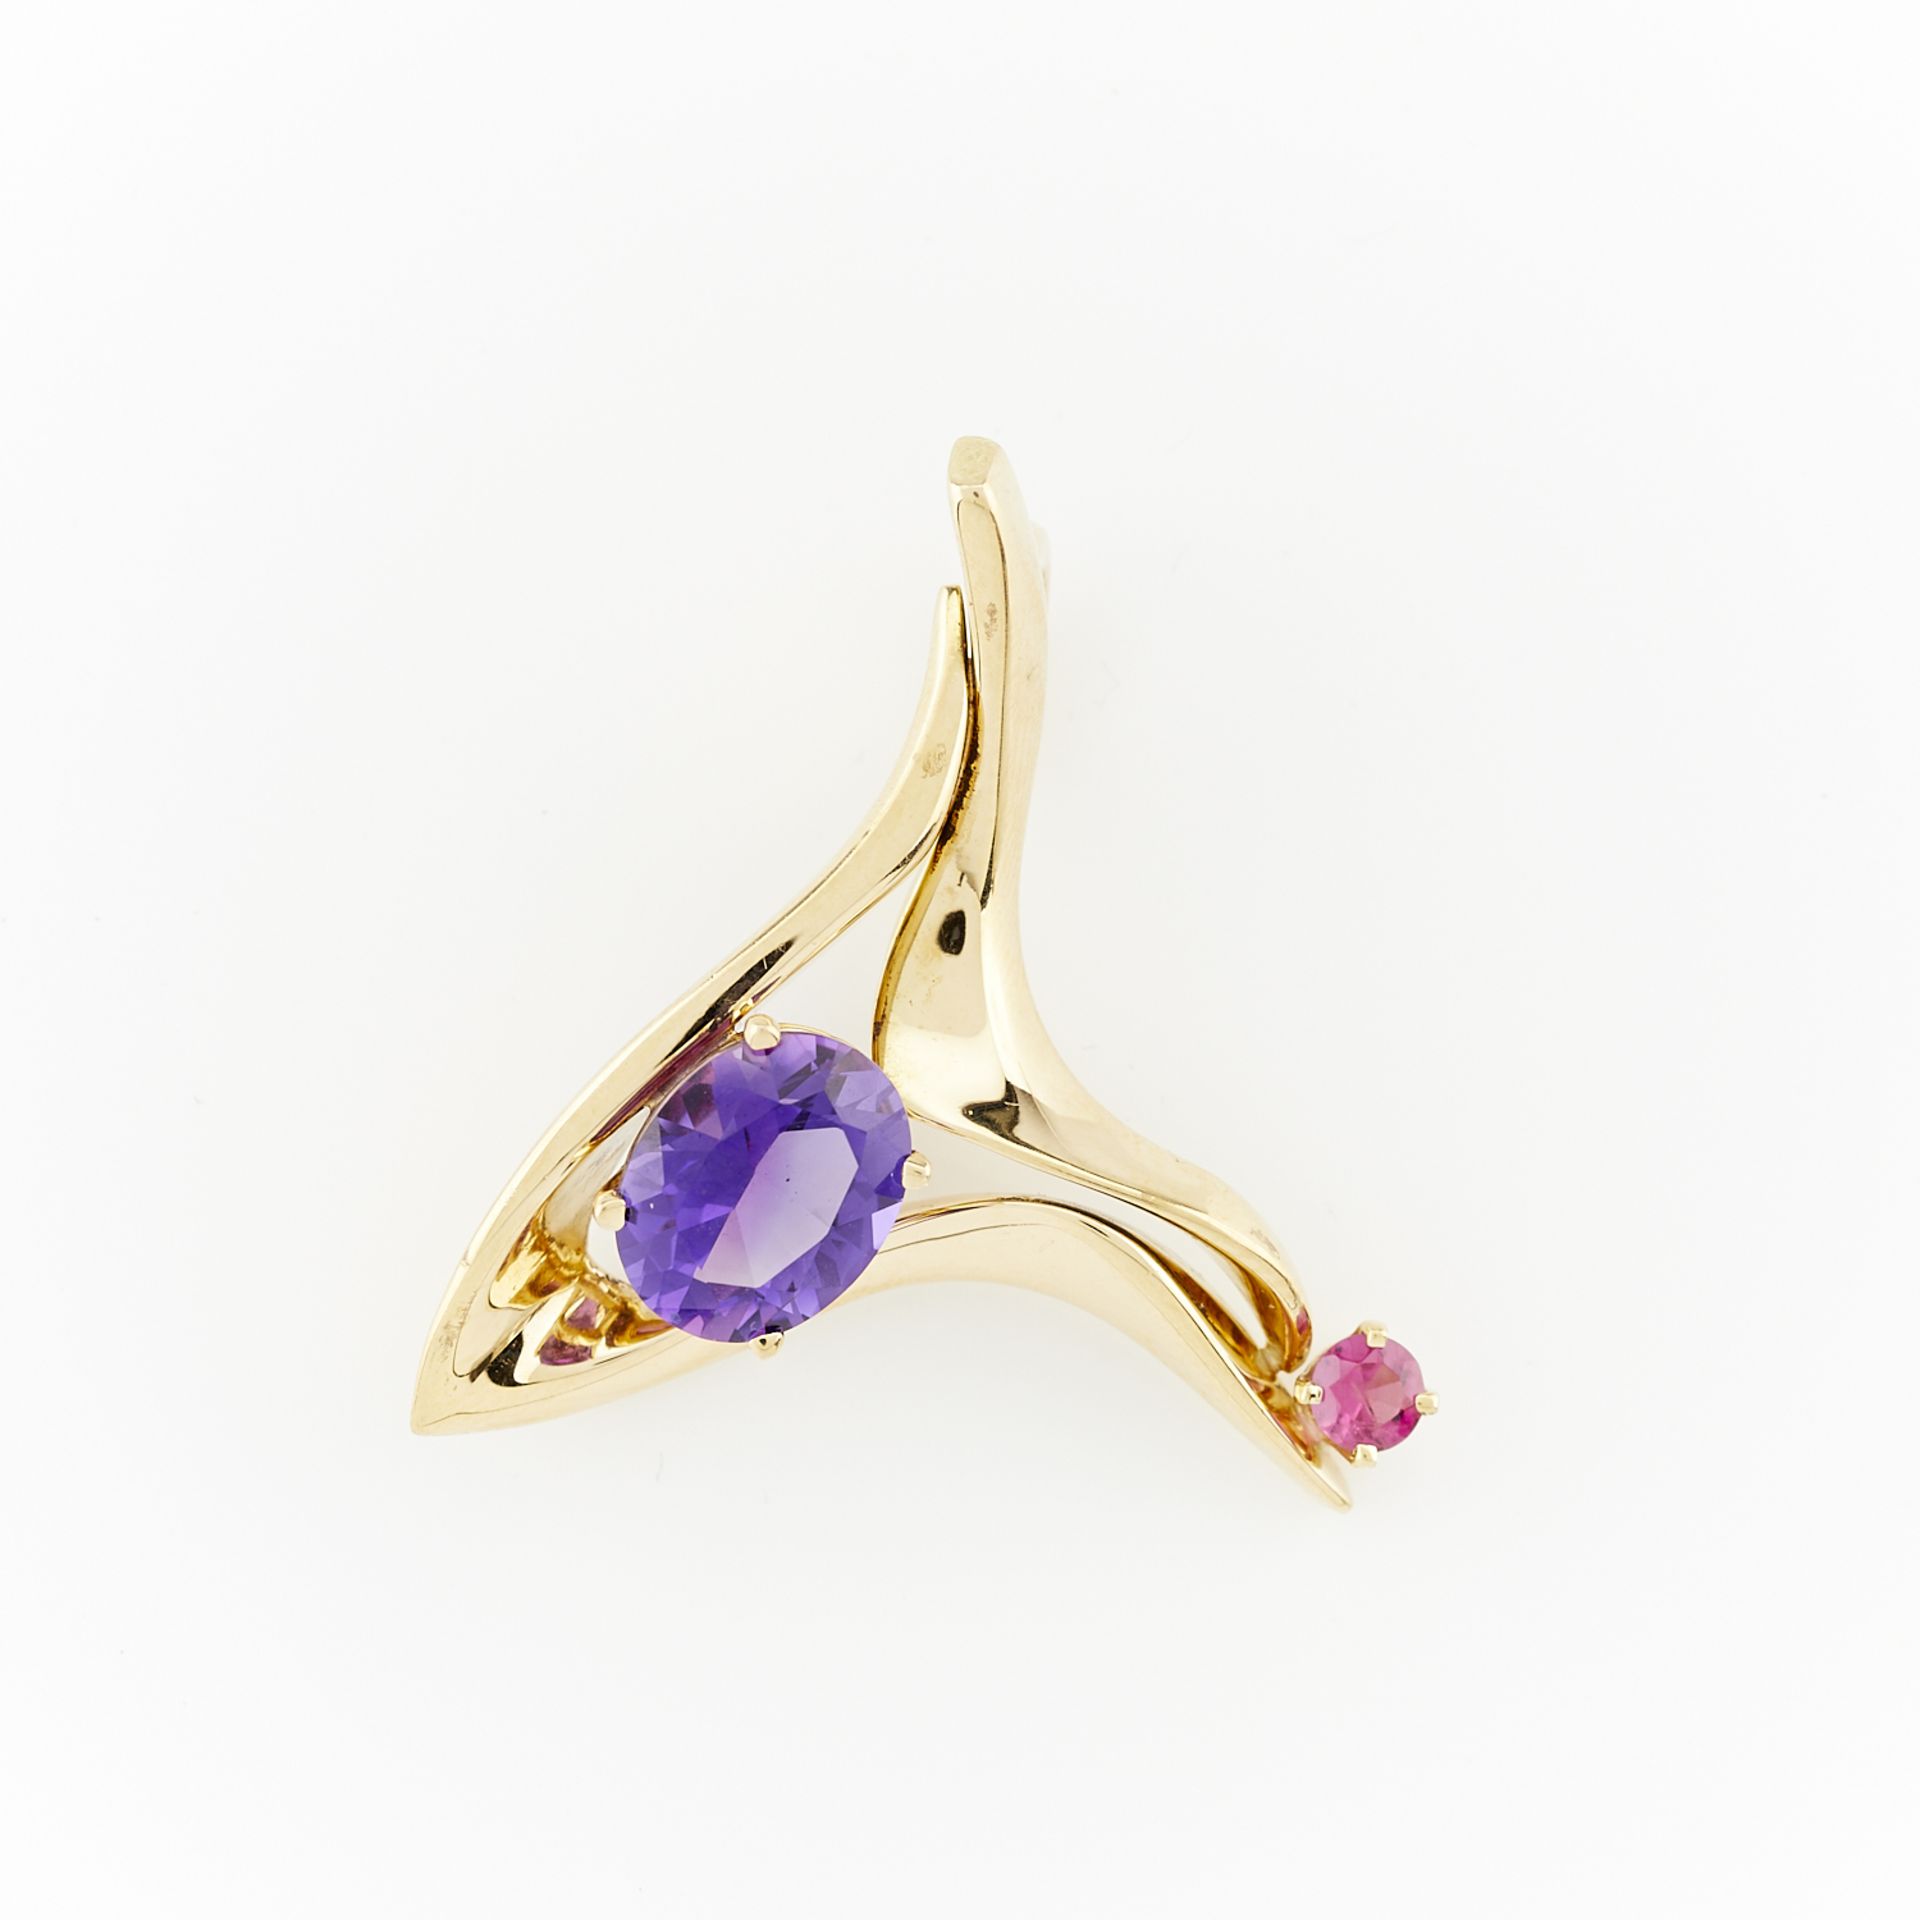 18k Gold Pendant with Amethyst & Citrine - Image 2 of 6